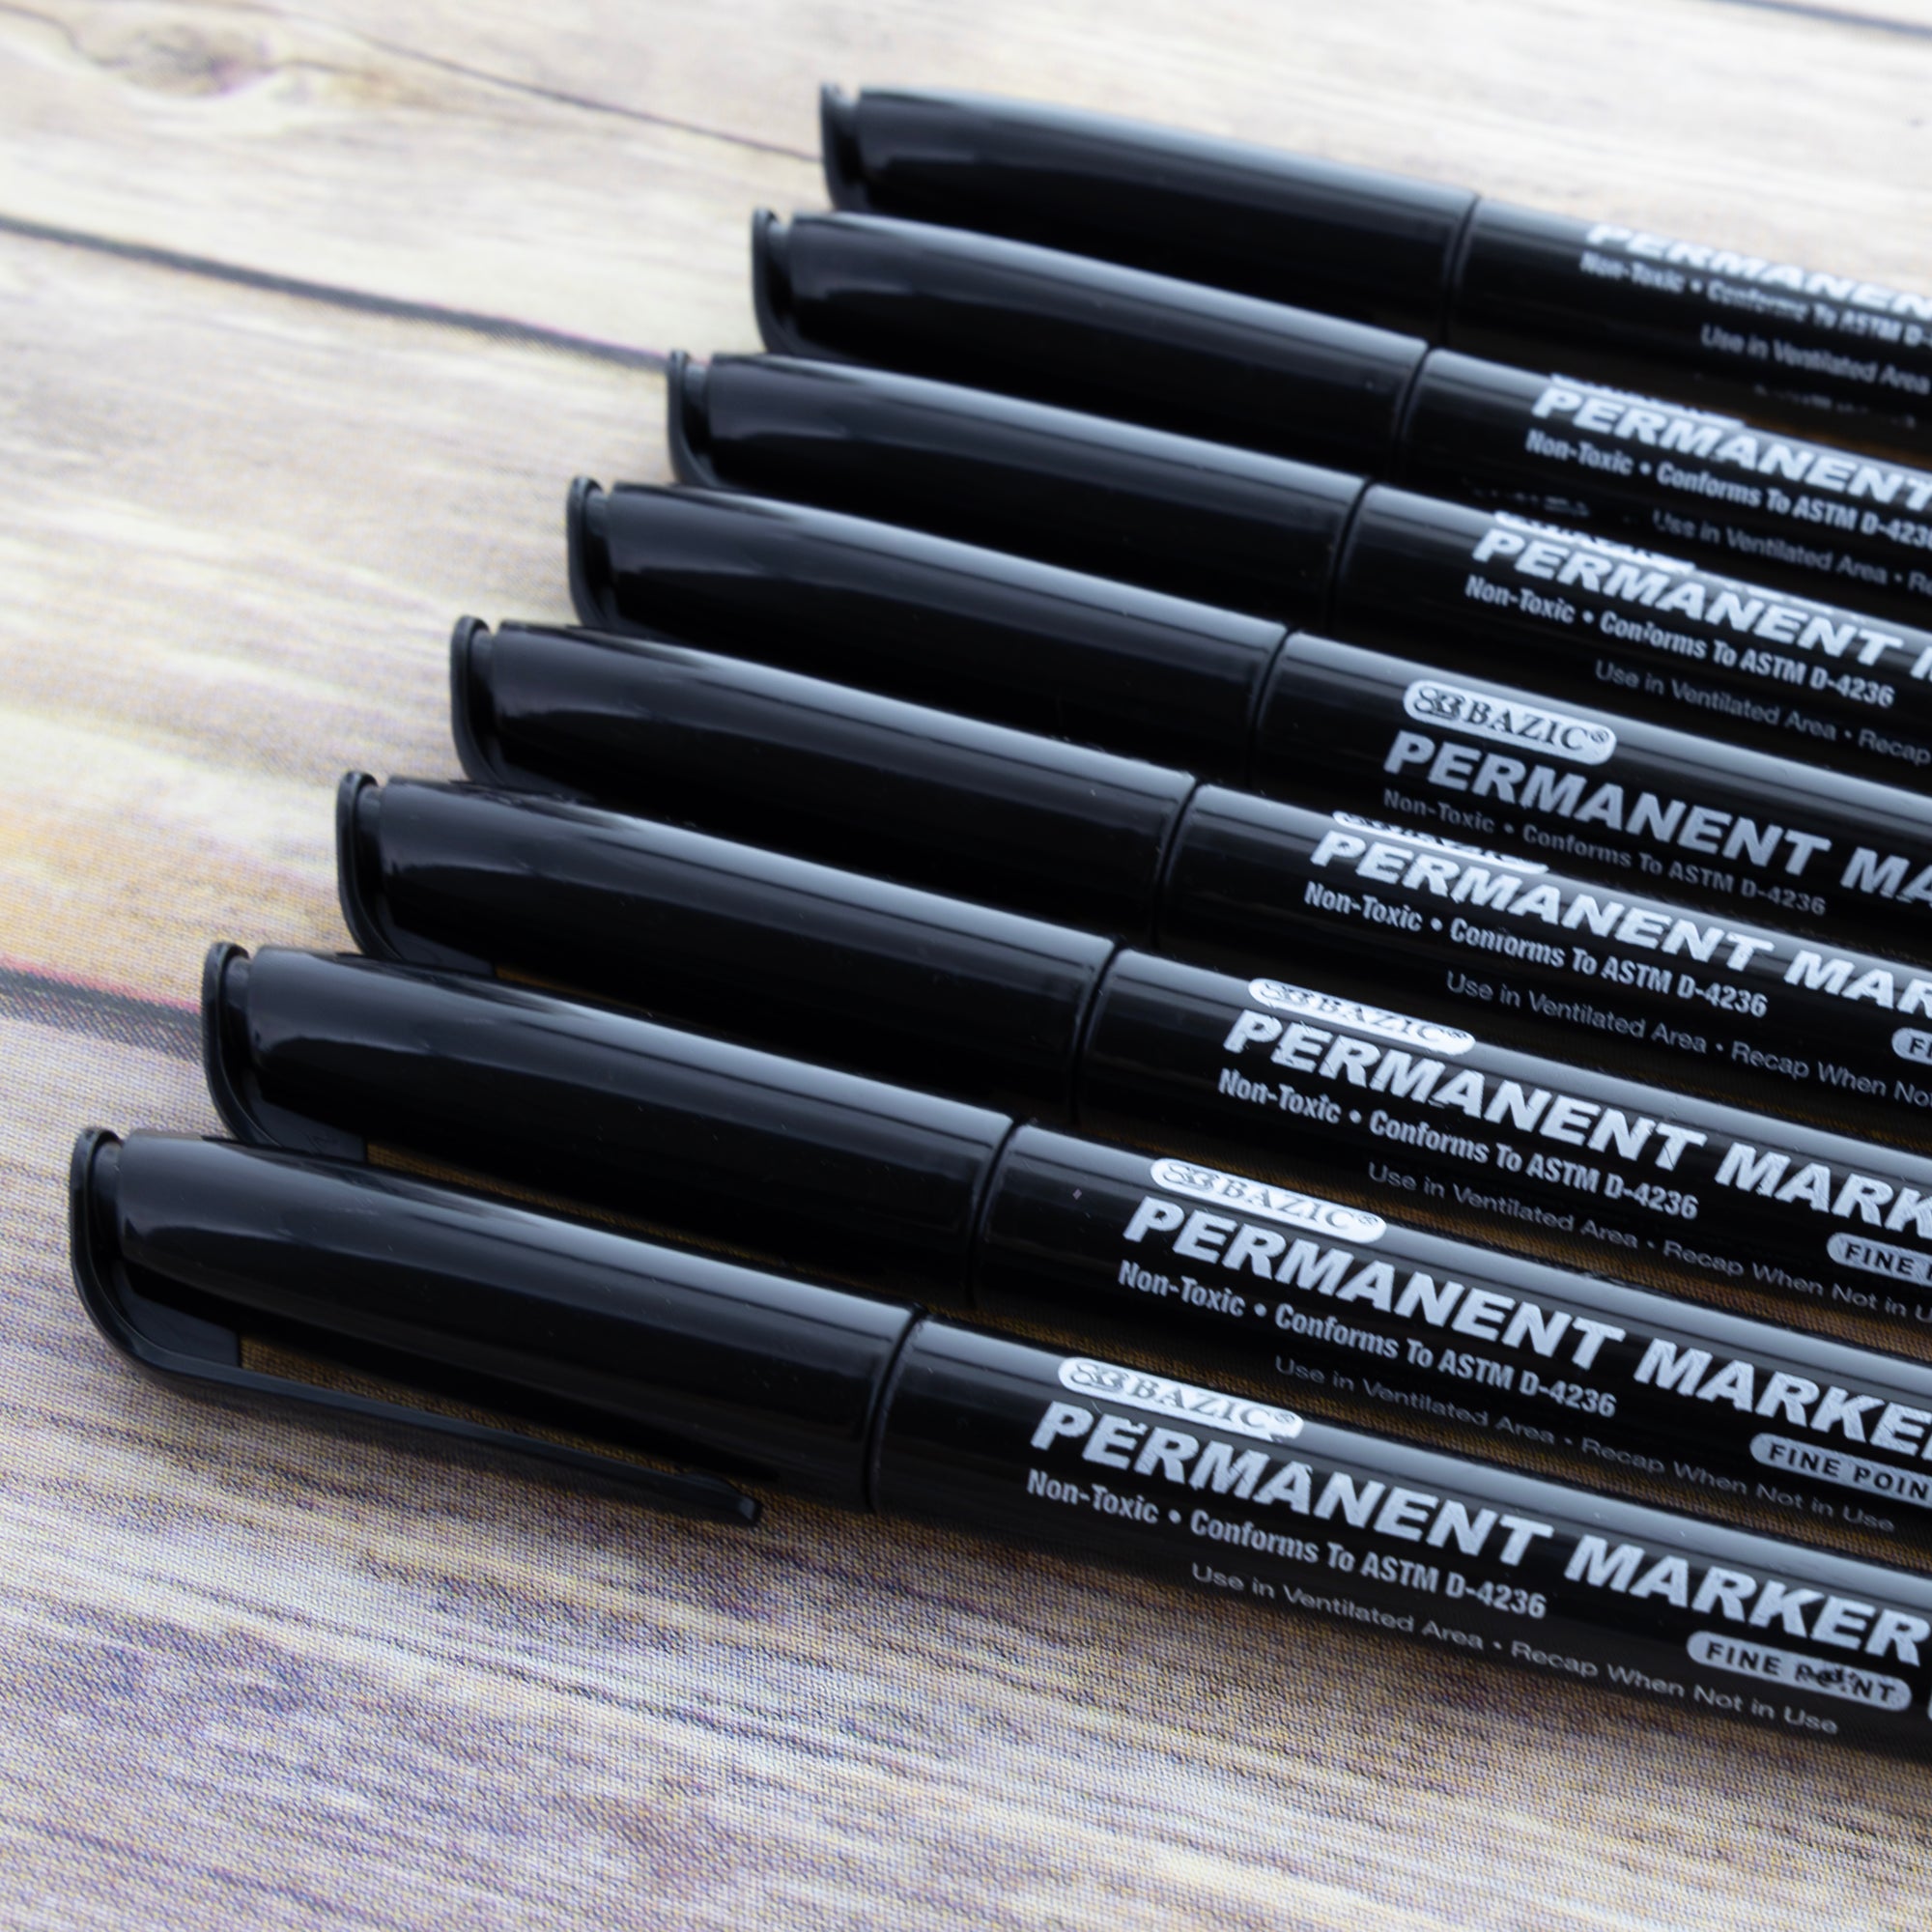 Sharpie Plastic Point Stick Permanent Water Resistant Pen, Black Ink, Fine,  4 per Pack : Office Products 